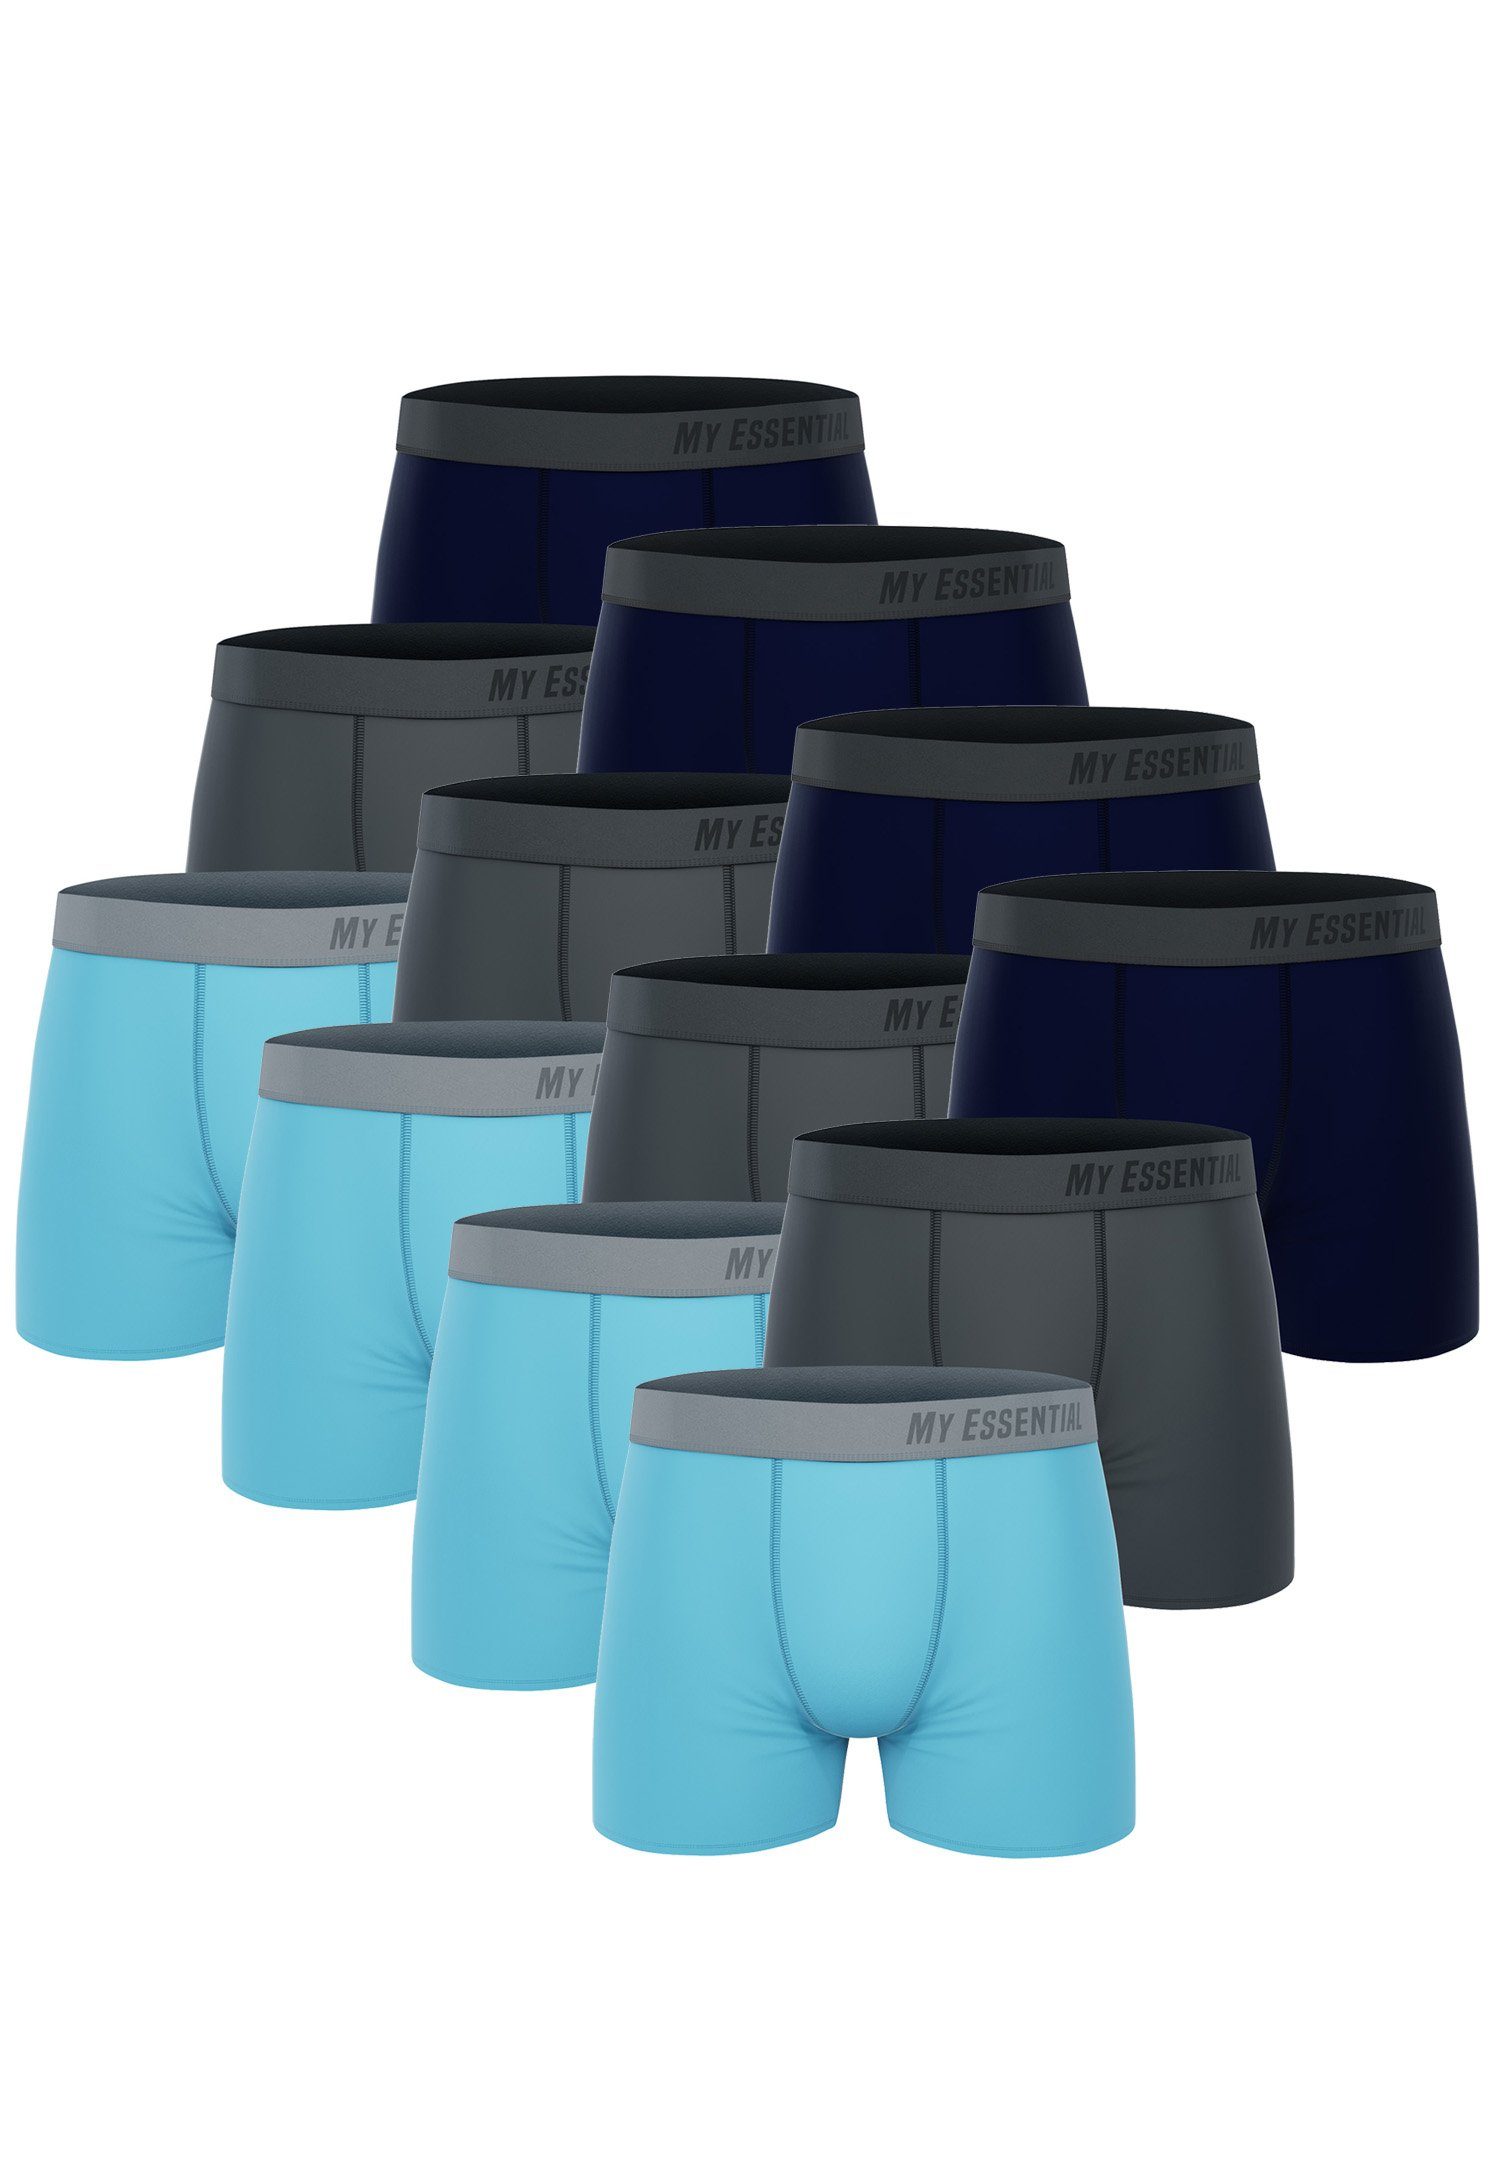 My Essential Clothing Boxershorts My Essential 12 Pack Boxers Cotton Bio (Spar-Pack, 12-St., 12er-Pack) Blue